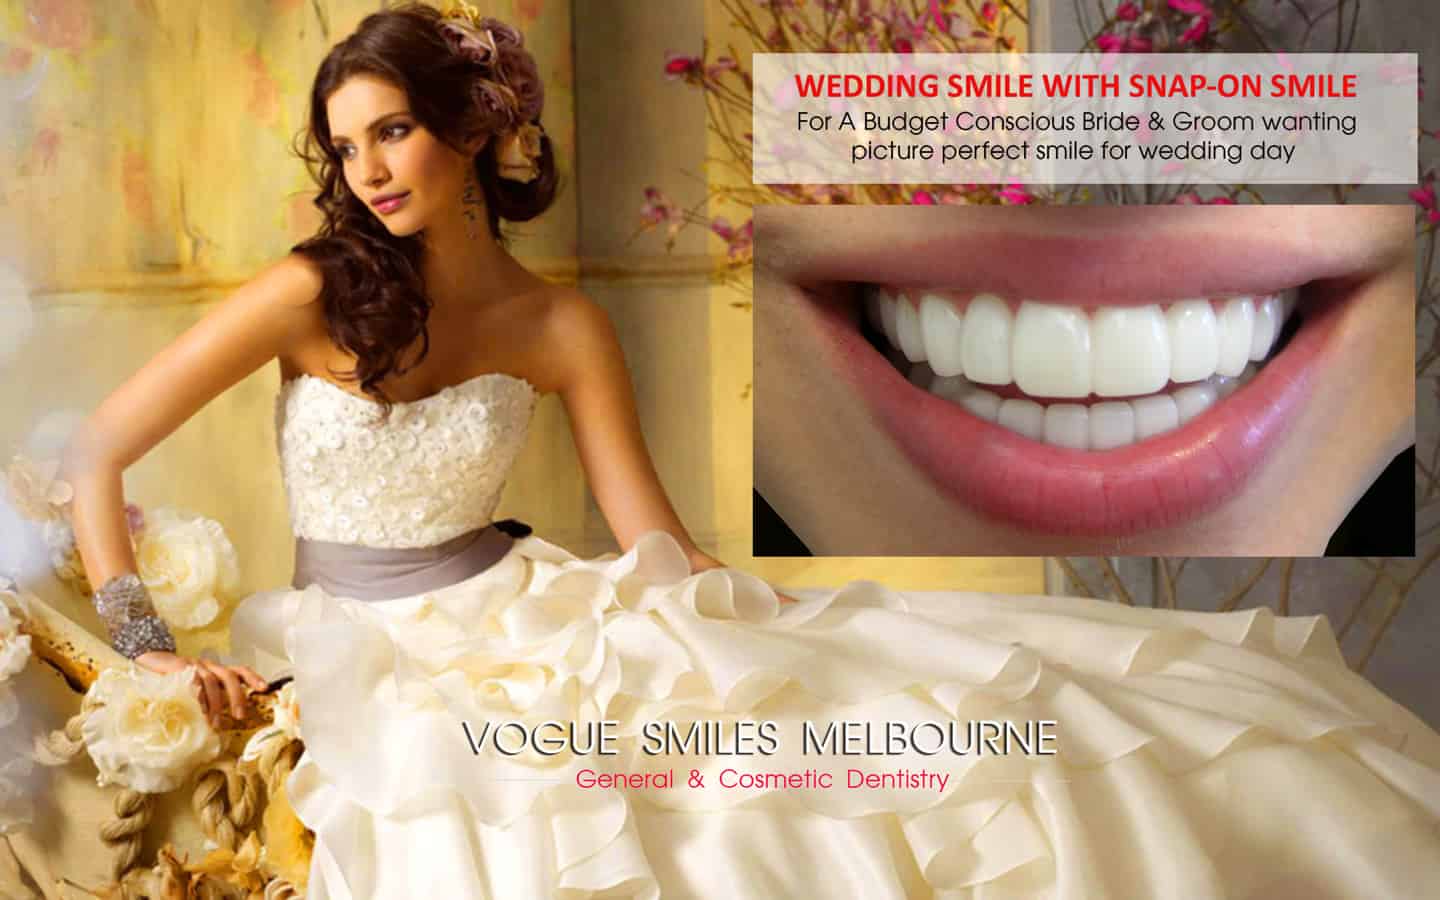 Wedding Smile Makeover Specials and Packages in Melbourne | Cosmetic Dentistry Bride and Groom BRIDAL wedding package deals | cheap wedding packages Melbourne